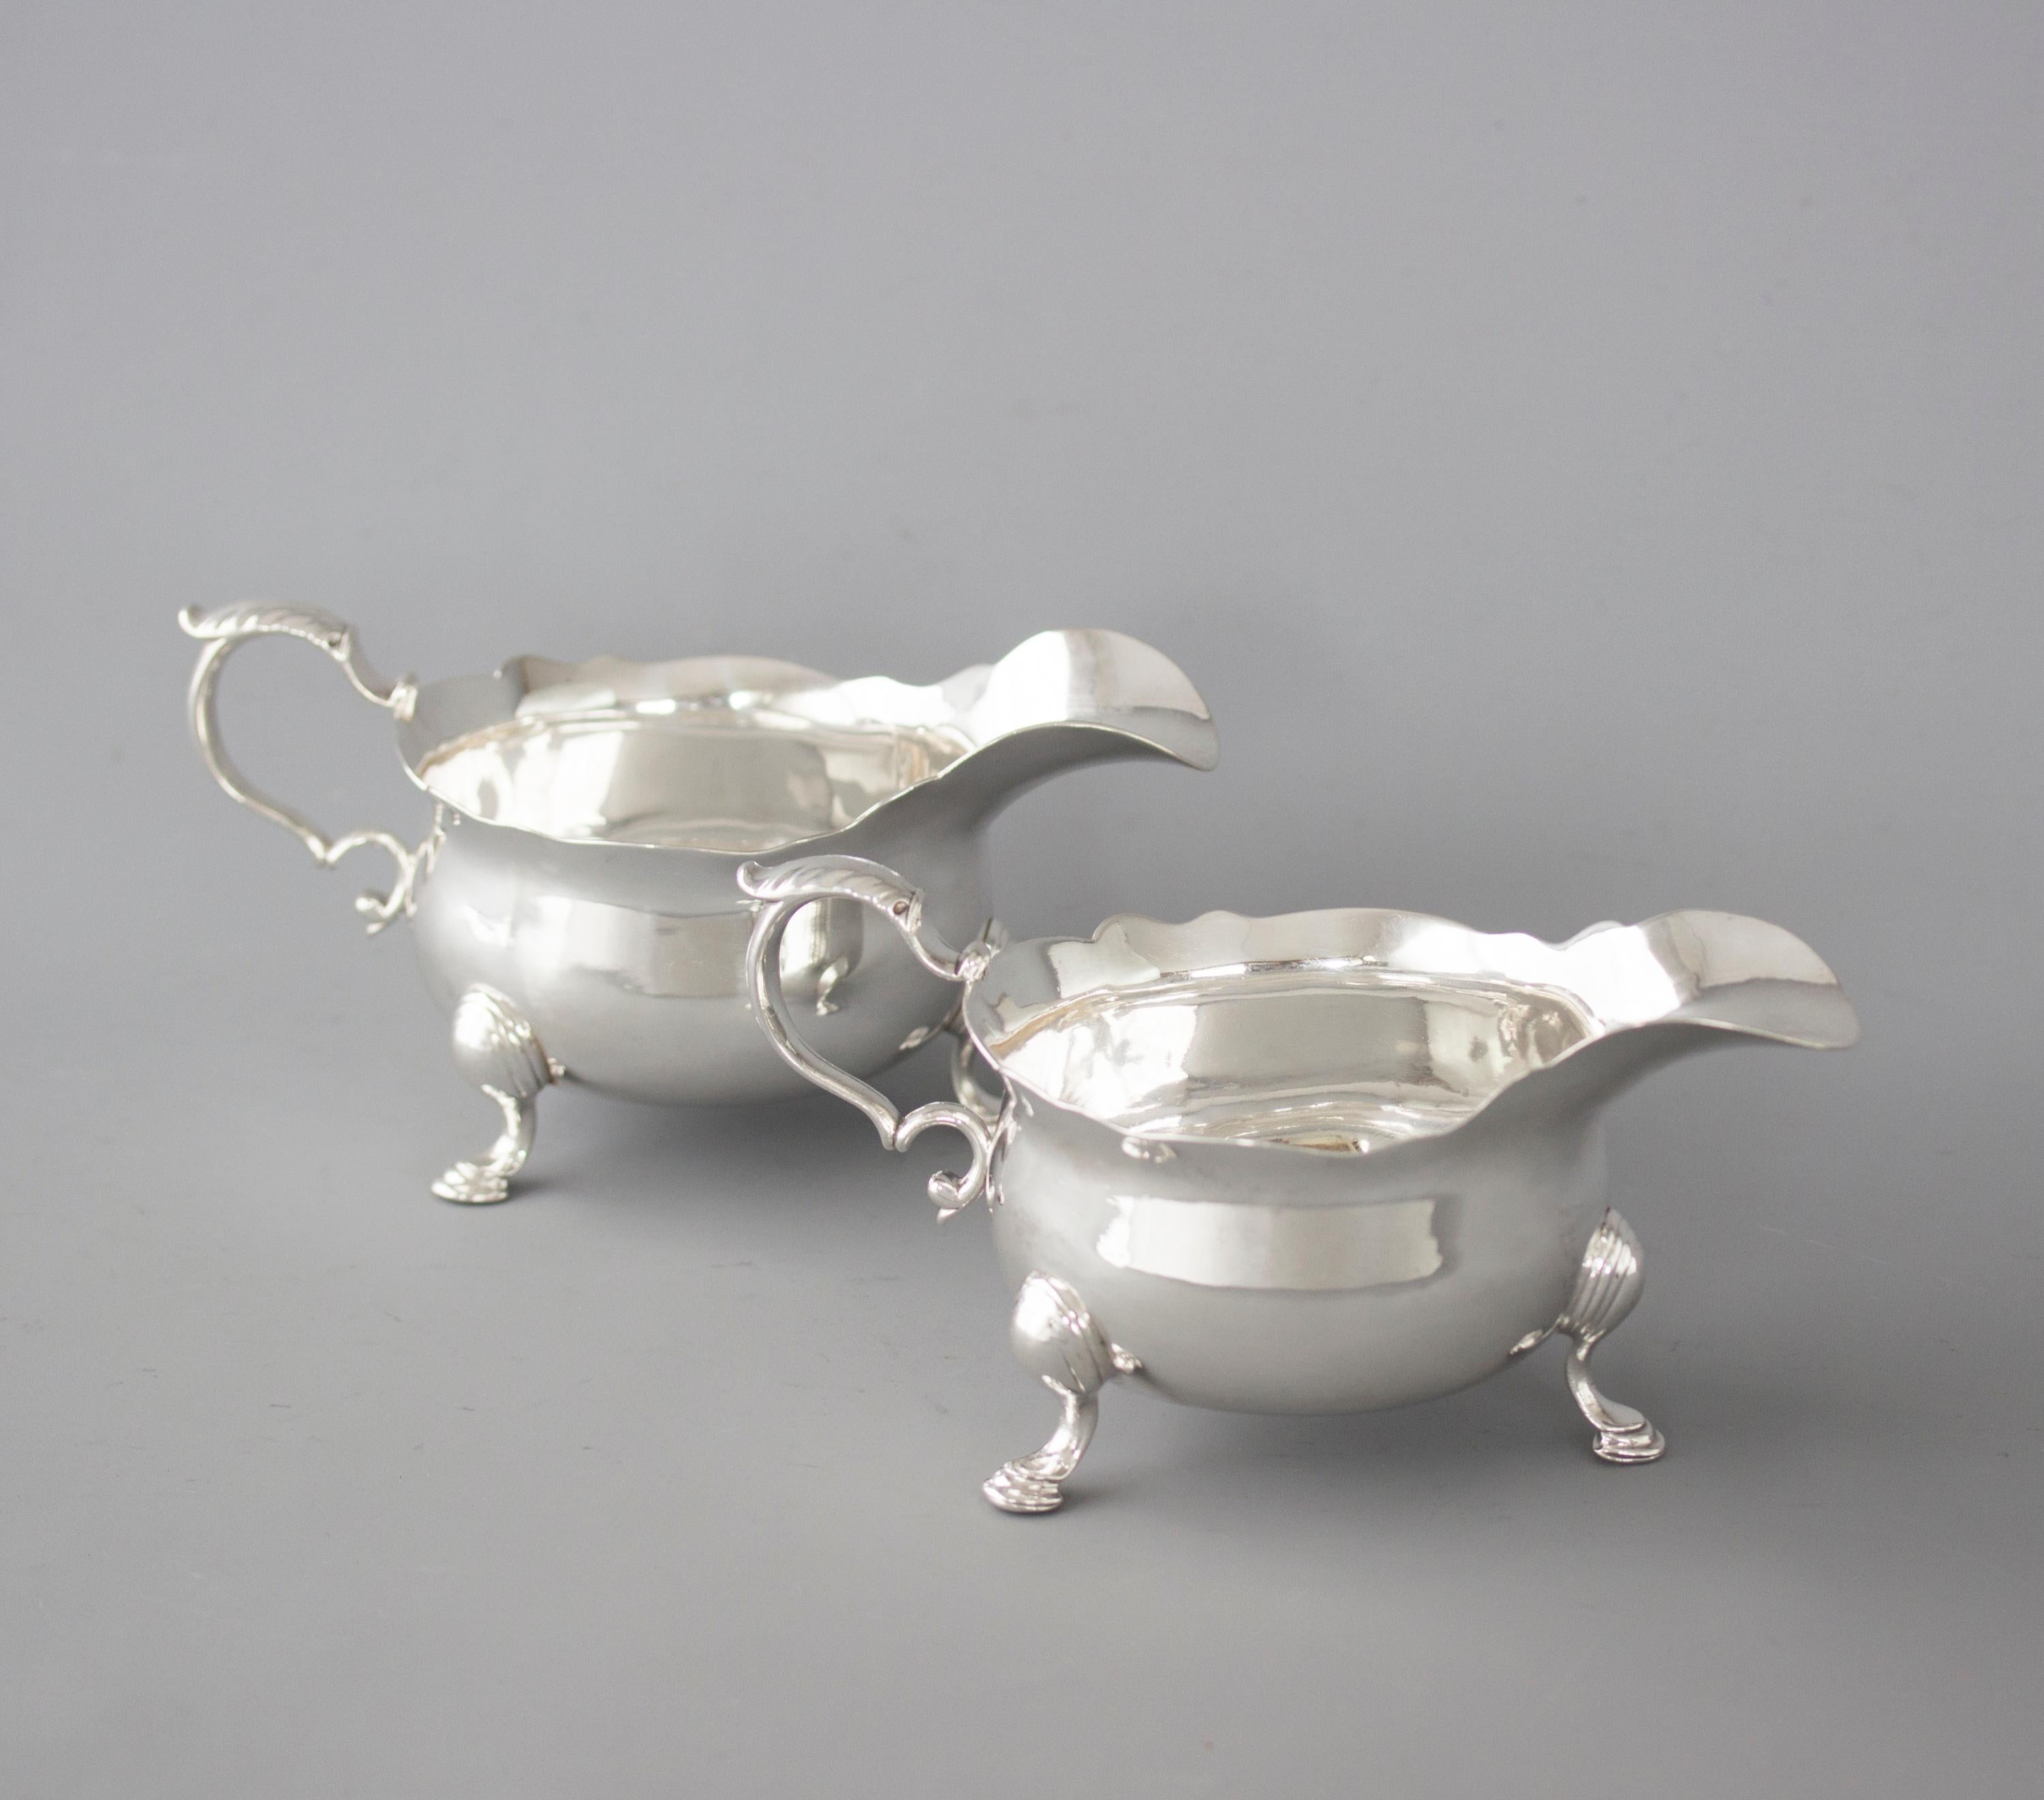 Pair of George II Silver Sauce Boats, London, 1737 by Benjamin West For Sale 7